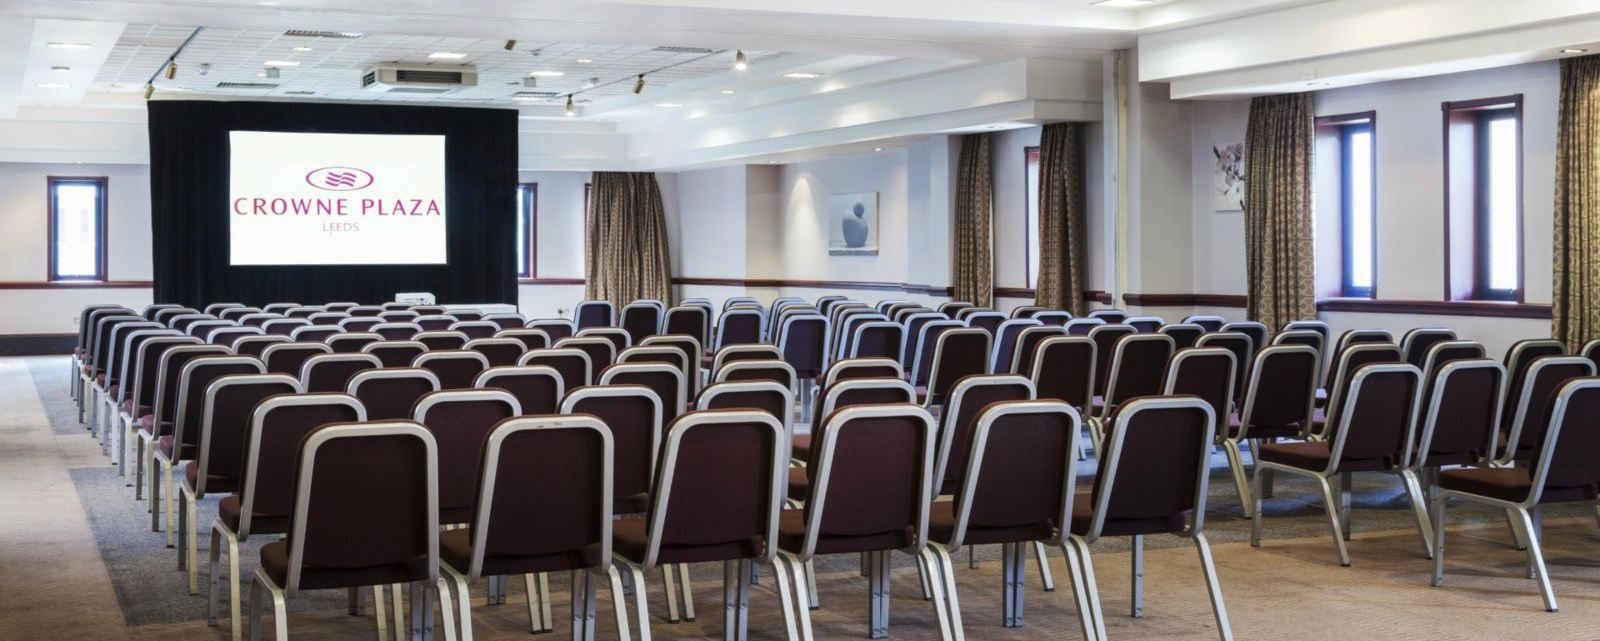 Leeds Crowne Plaza Meetings and Events